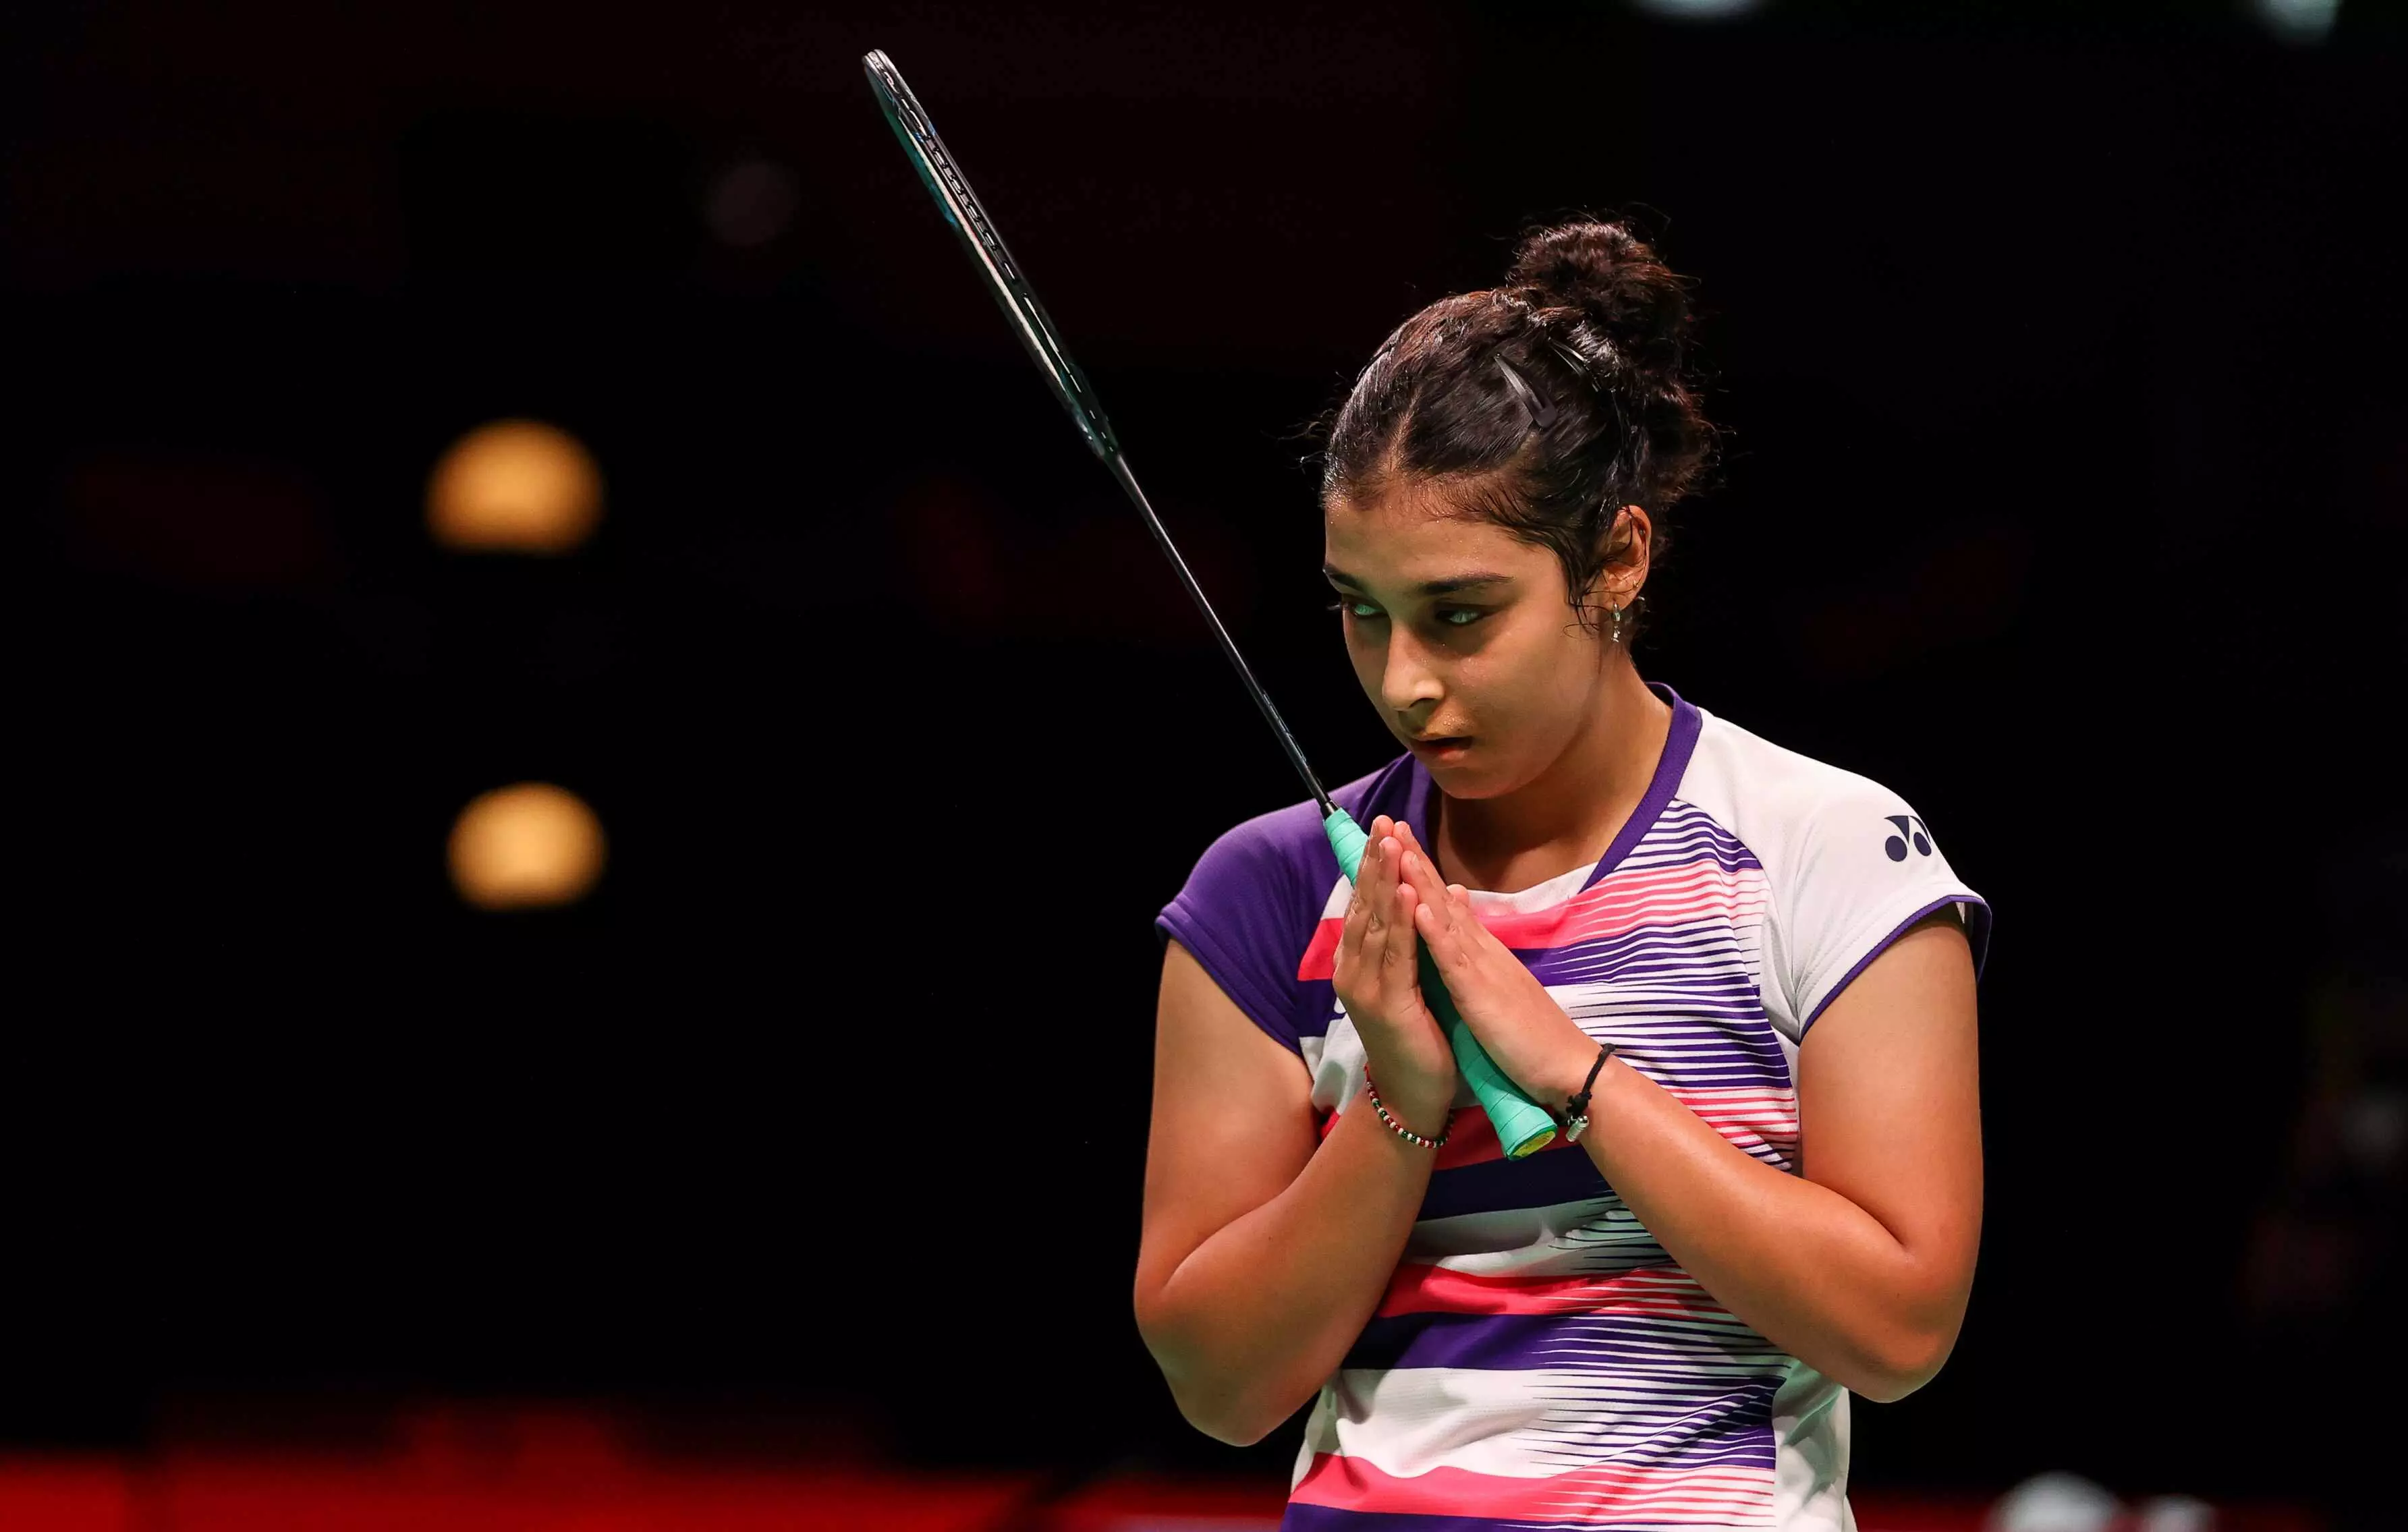 Aditi first picked up a racquet at the age of seven at her school in Ghaziabad (Source: BWF)